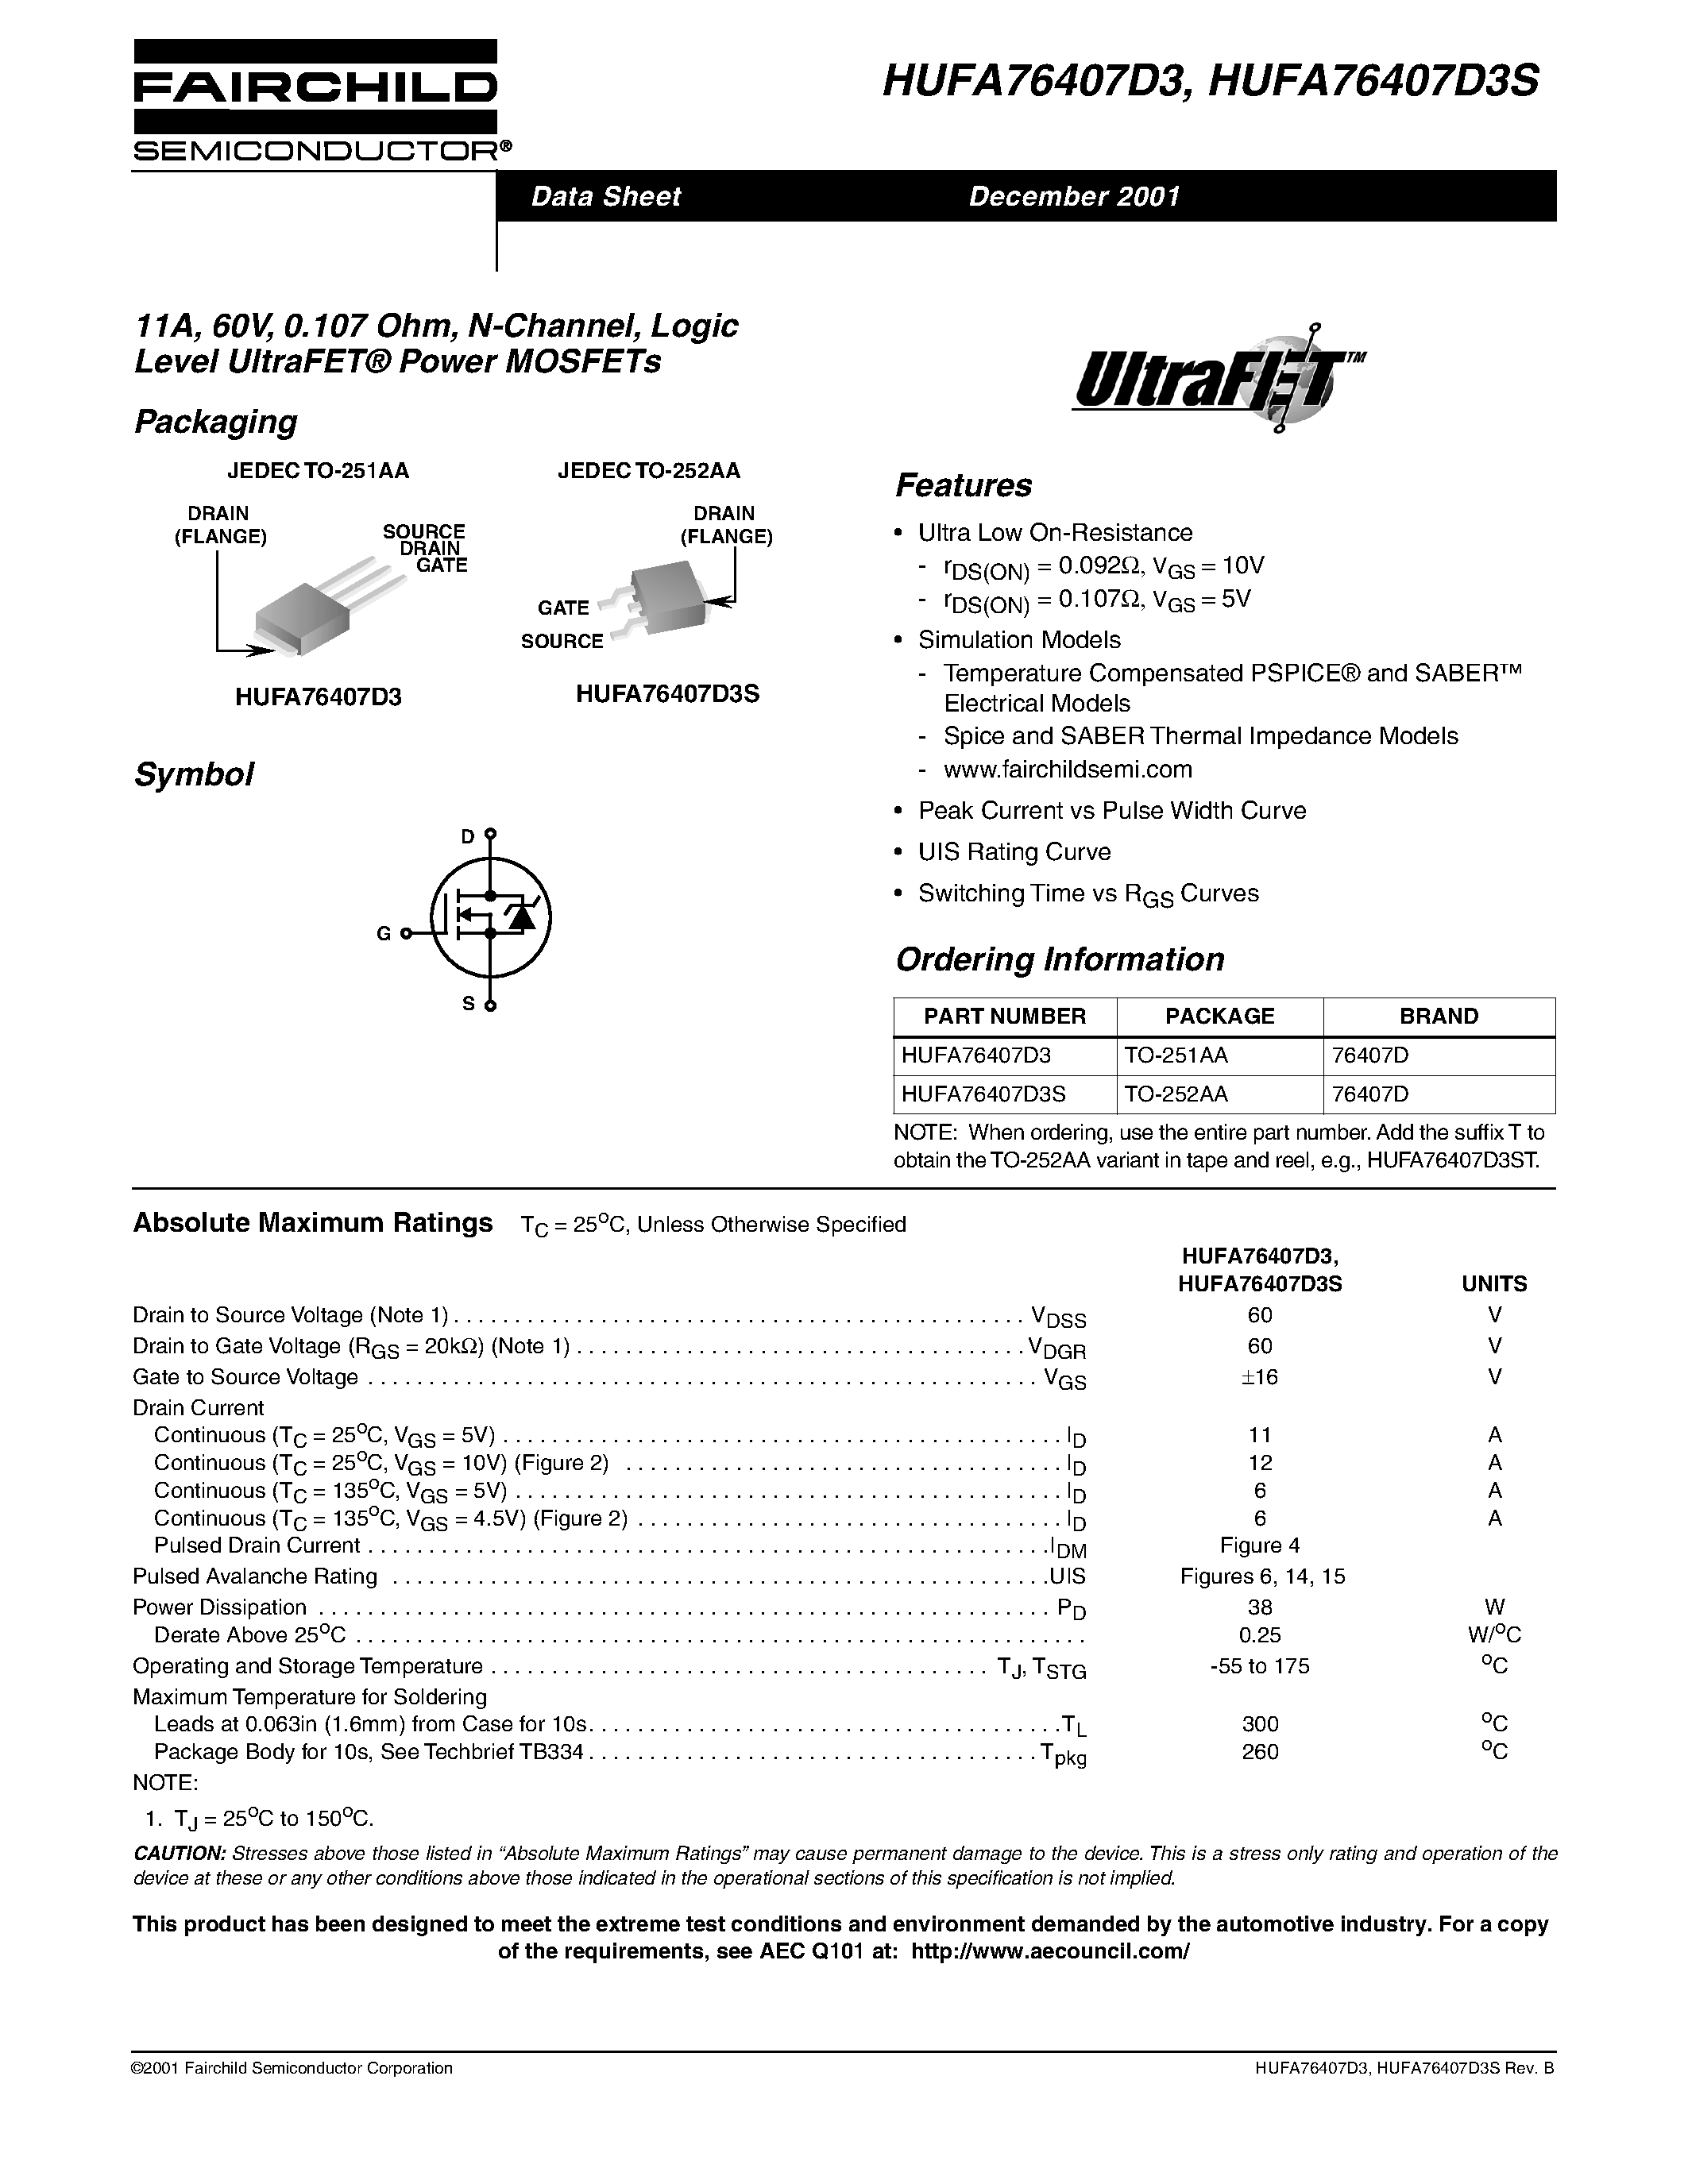 Datasheet HUFA76407D3S - 11A/ 60V/ 0.107 Ohm/ N-Channel/ Logic Level UltraFET Power MOSFETs page 1